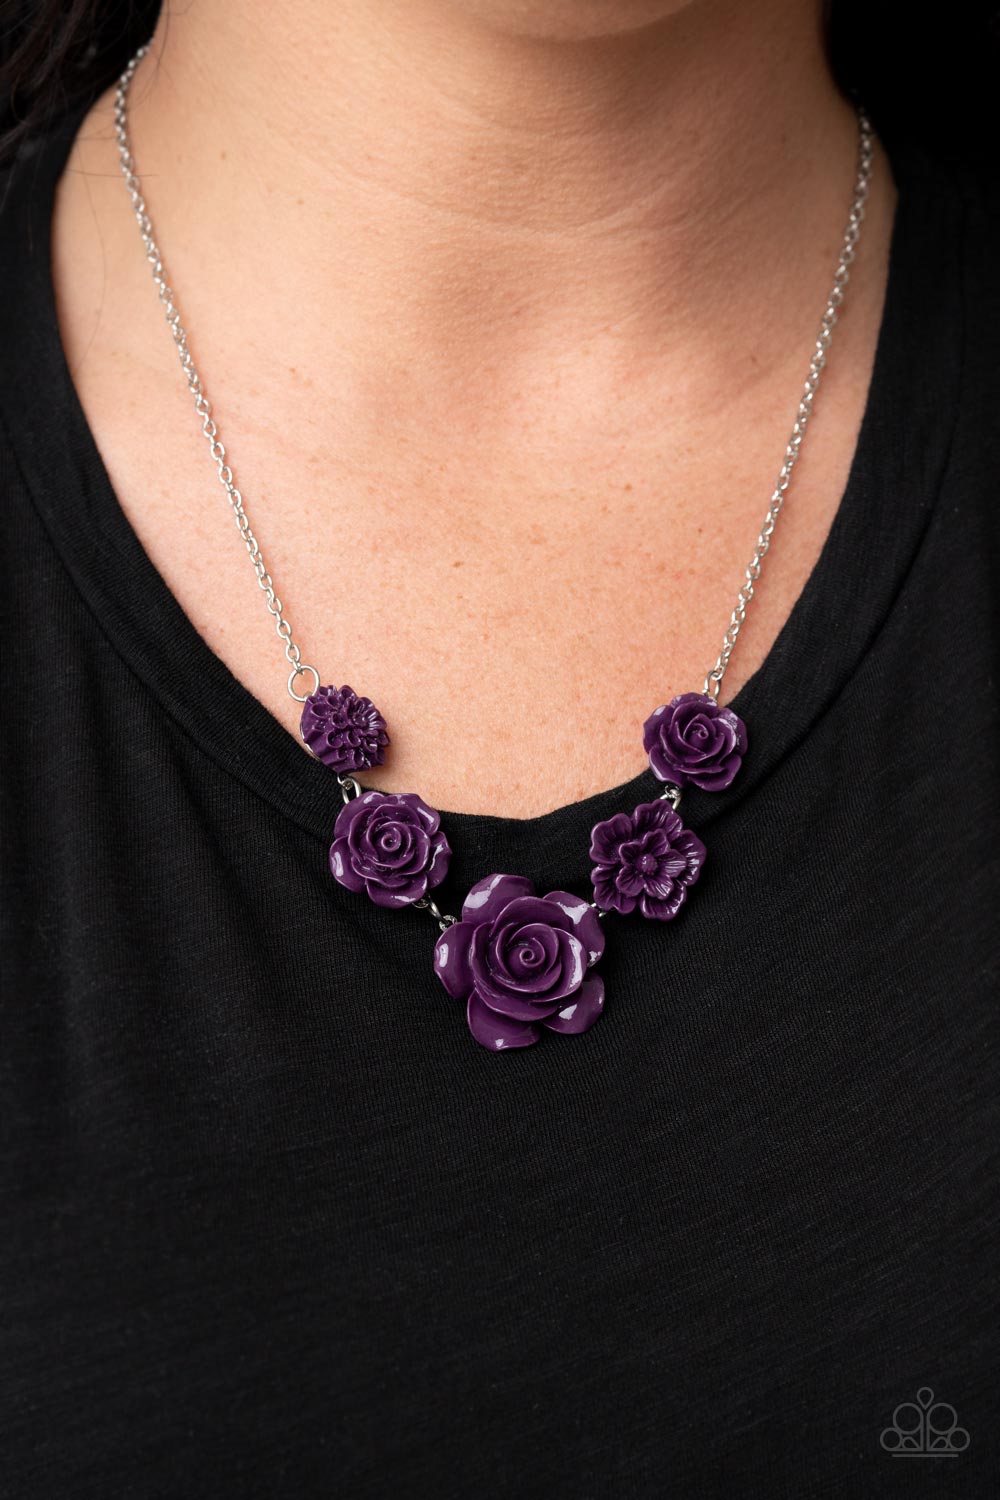 PRIMROSE and Pretty Purple Flower Necklace - Paparazzi Accessories- lightbox - CarasShop.com - $5 Jewelry by Cara Jewels